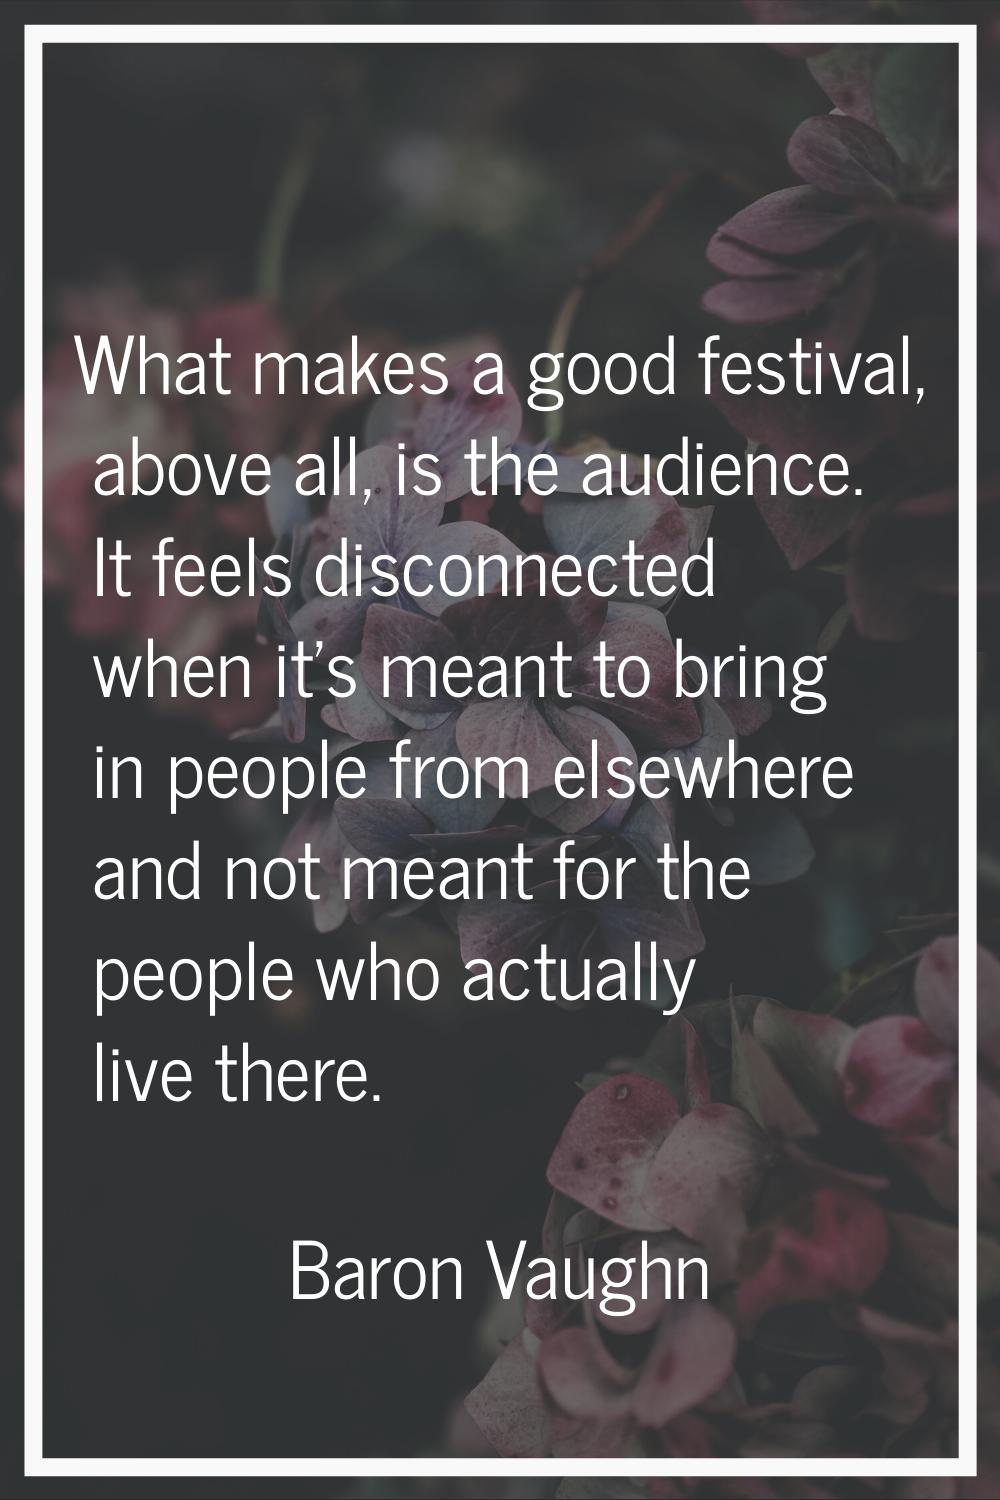 What makes a good festival, above all, is the audience. It feels disconnected when it's meant to br